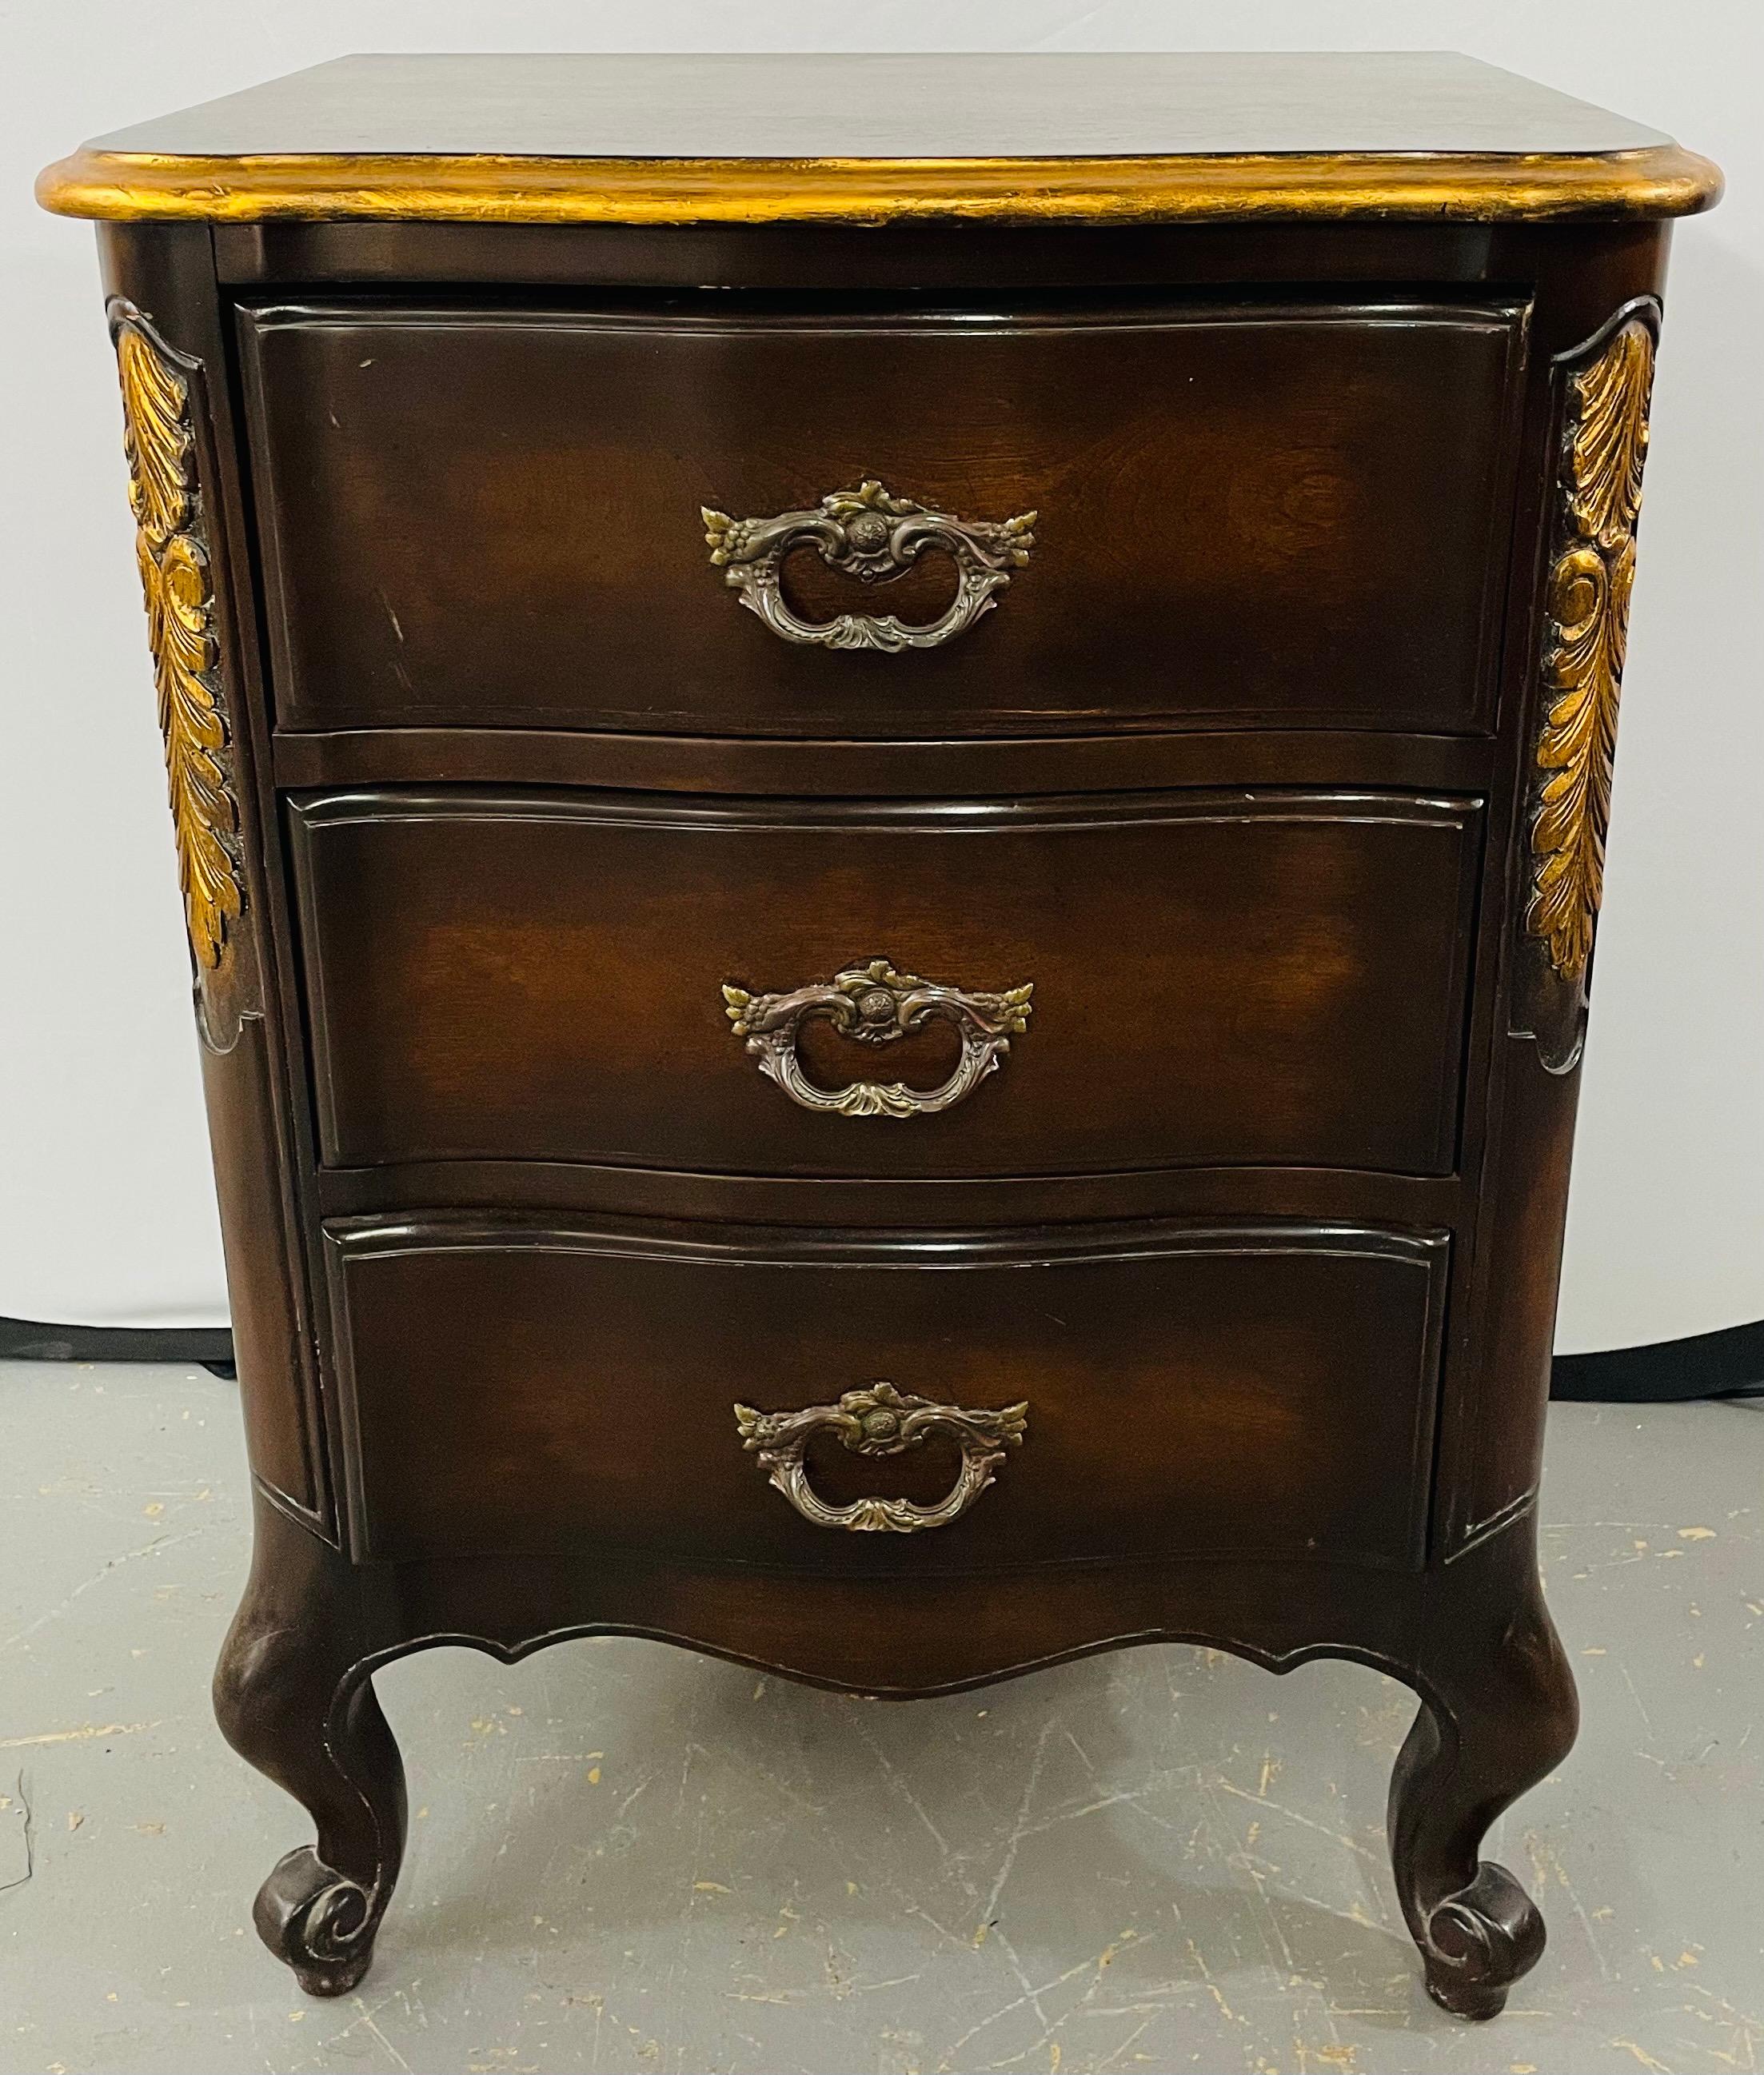 20th Century French Provincial 3 Drawer Mahogany Gilt Decorated Nightstand Table, a Pair